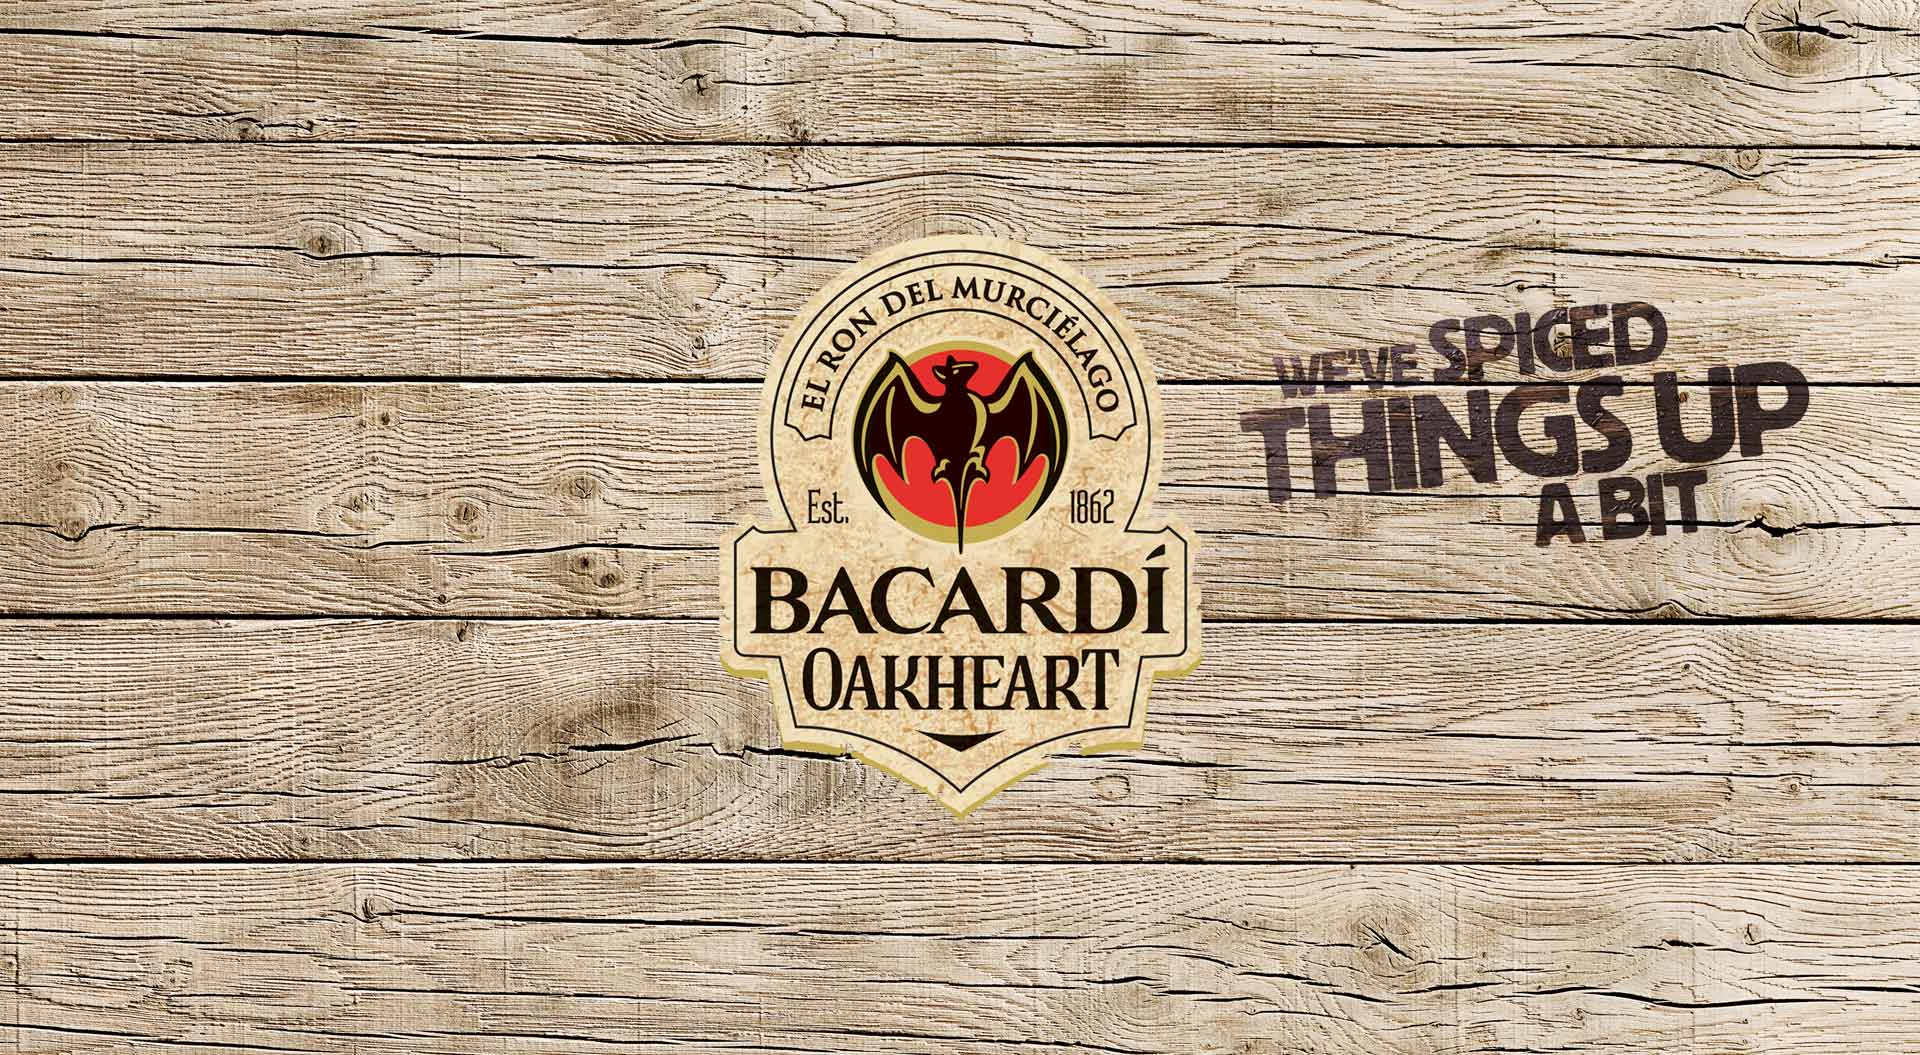 Bacardi Global Travel Retail, Oakheart brand experience, we've spiced things up a bit brand identity and platform